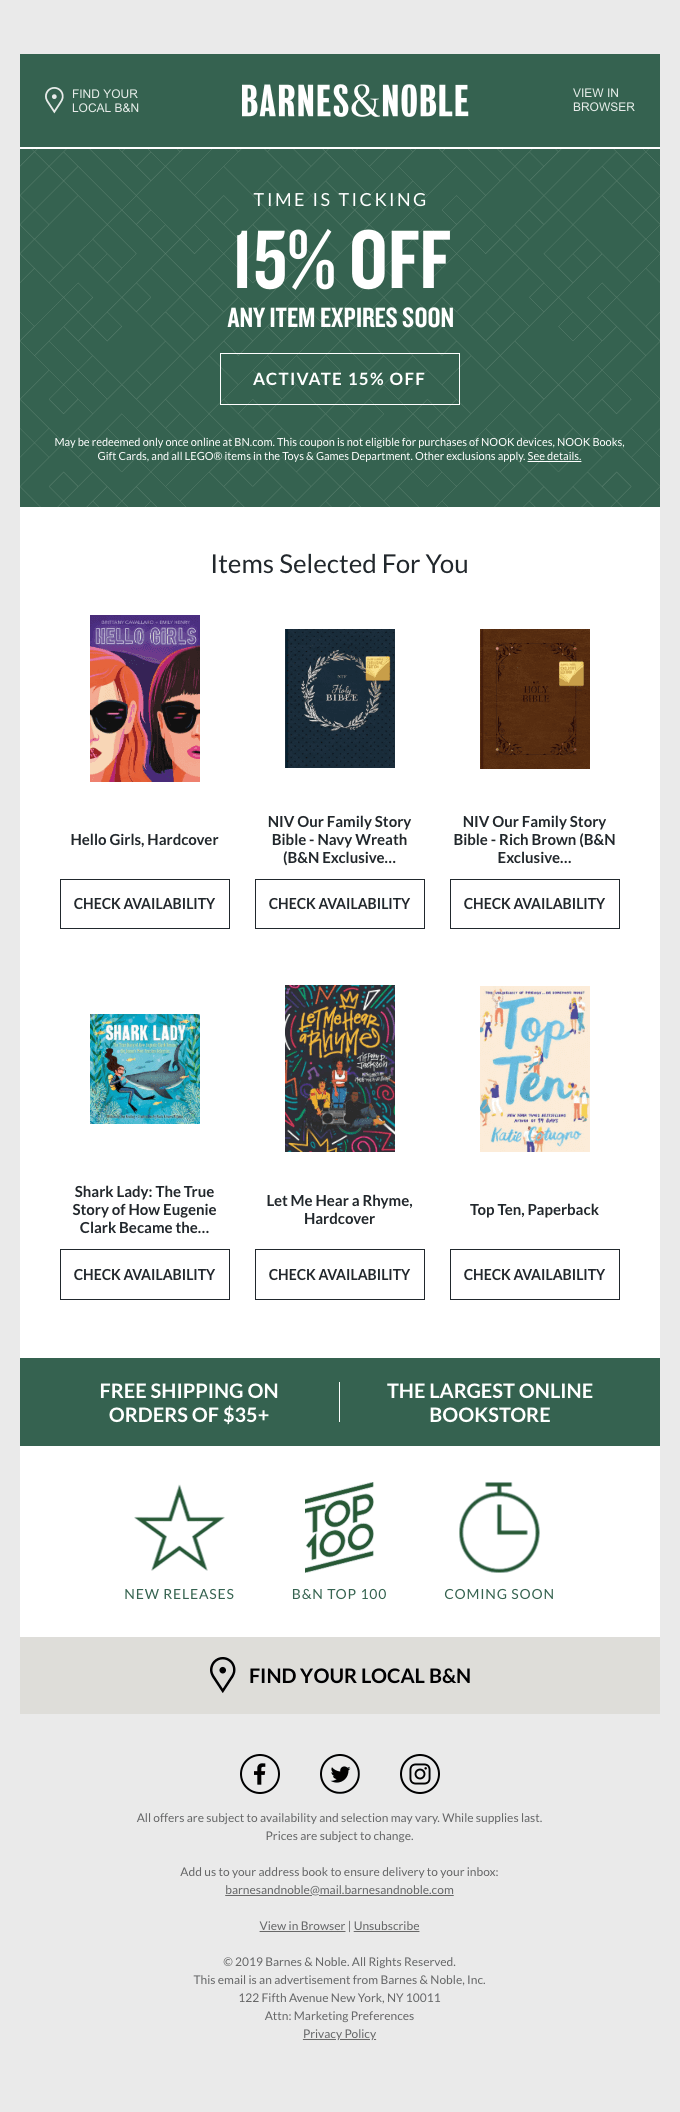 A limited offer email from Barnes & Noble